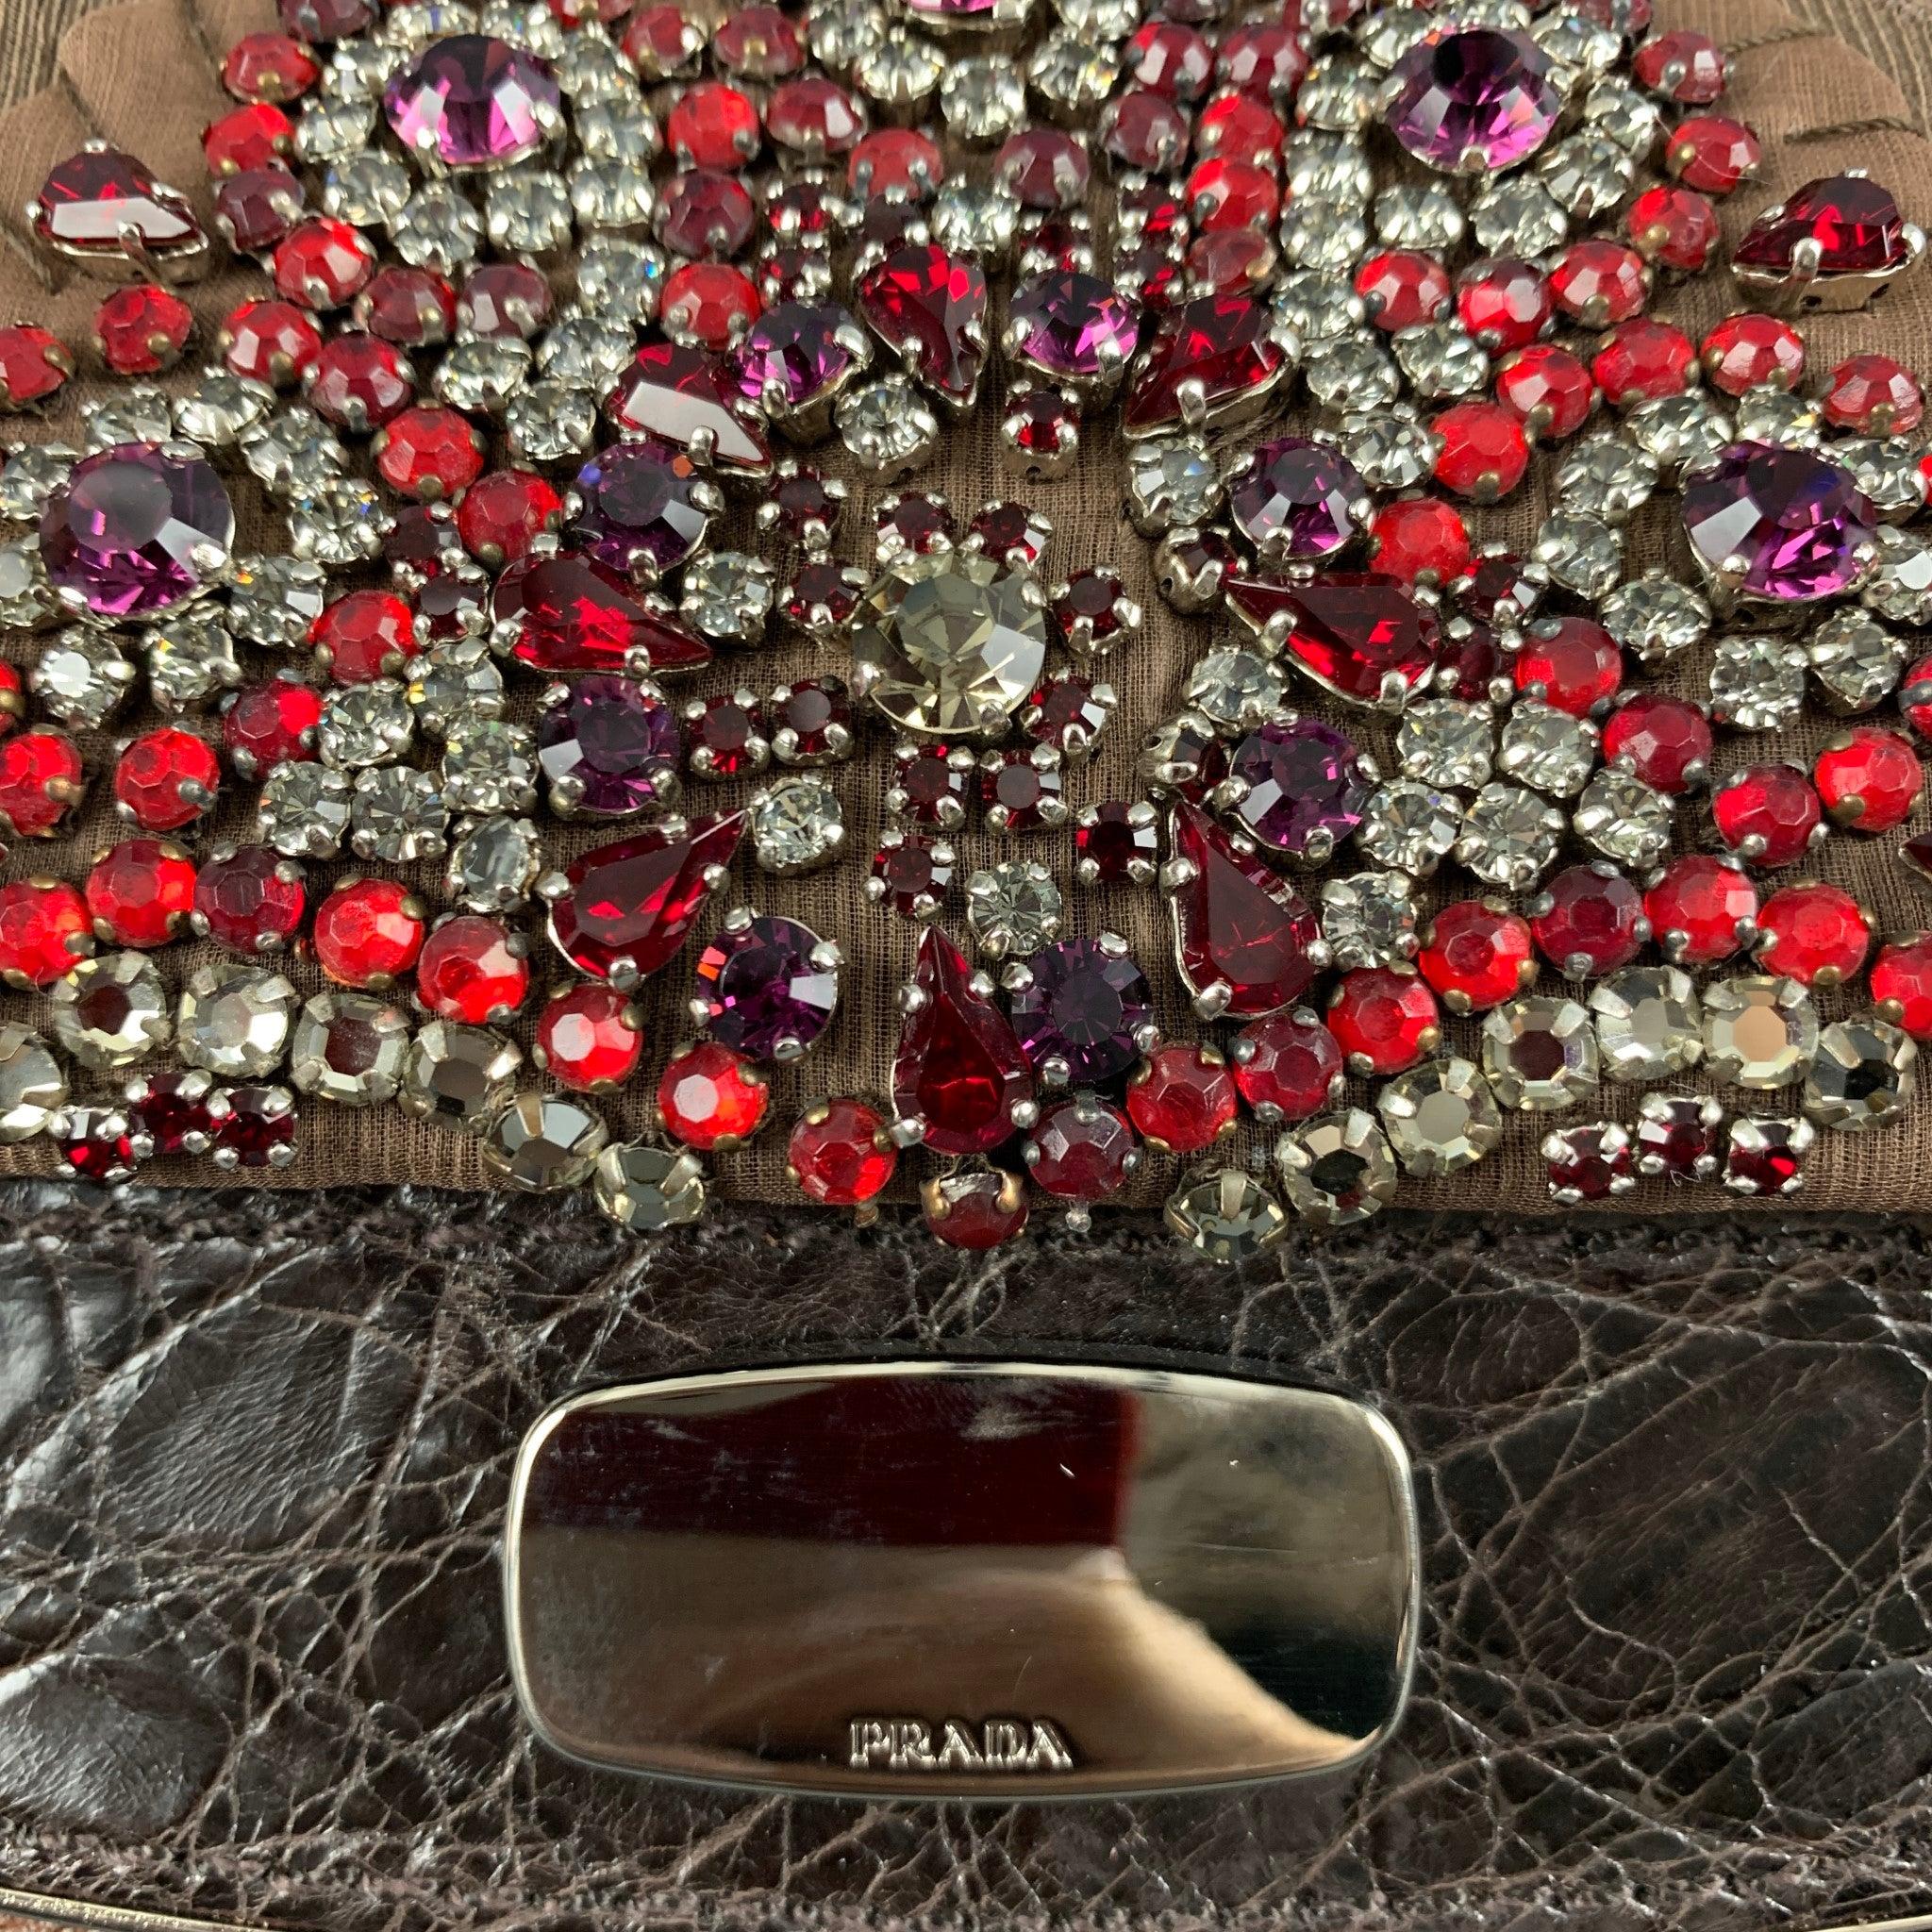 PRADA ANTIC SKIPPER+C handbag comes in a brown leather featuring a red rhinestones embellished, detachable strap, alligator leather panel, inner pocket, and a push open closure. Made in Italy. Comes with Dust Bag.Very Good Pre-Owned Condition. Light